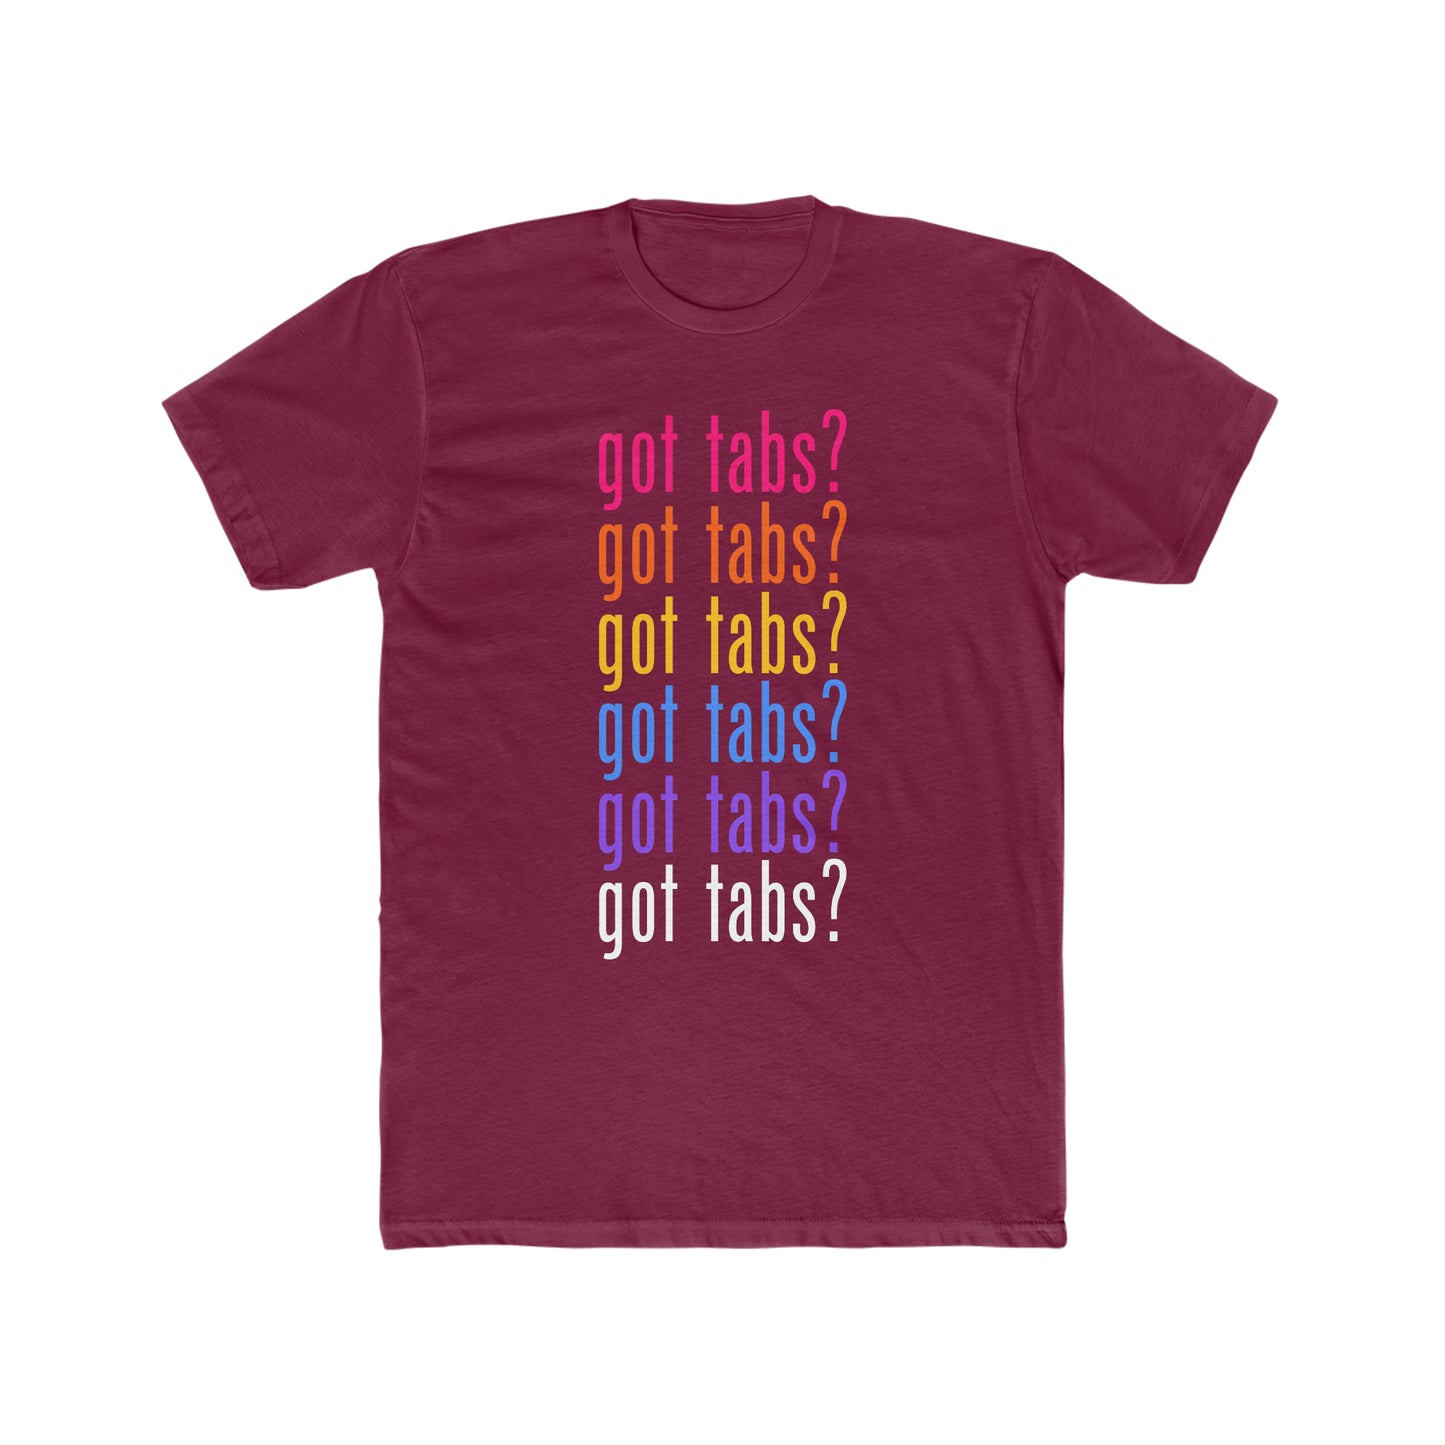 "Got TABS?" Funny Guitar T-Shirt | Casual Wear for Musicians | Novelty Tee for Guitar Players | Great Gift for Music Enthusiasts